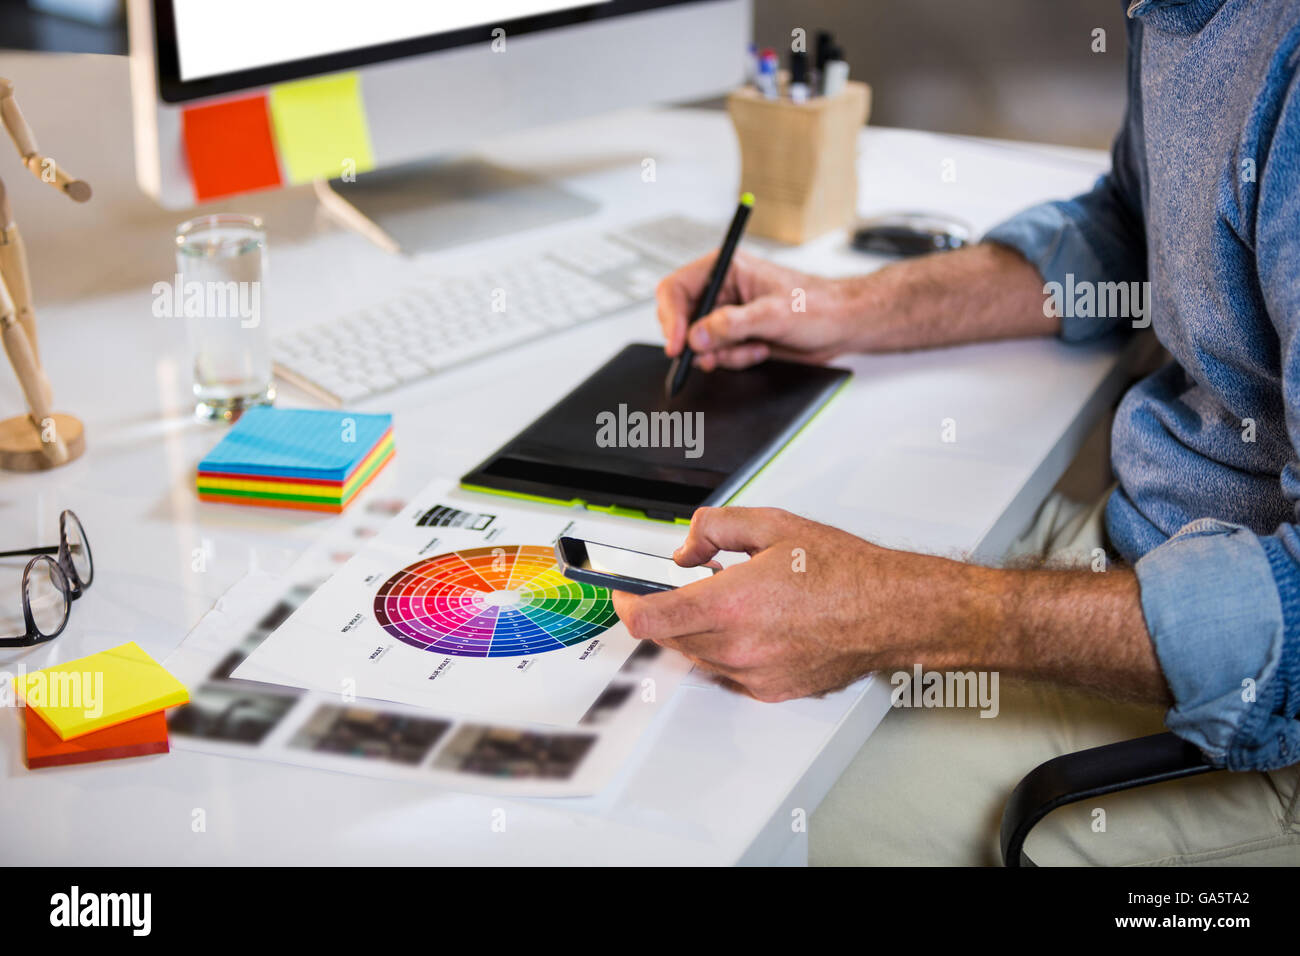 Midsection of businessman using graphics tablet Stock Photo